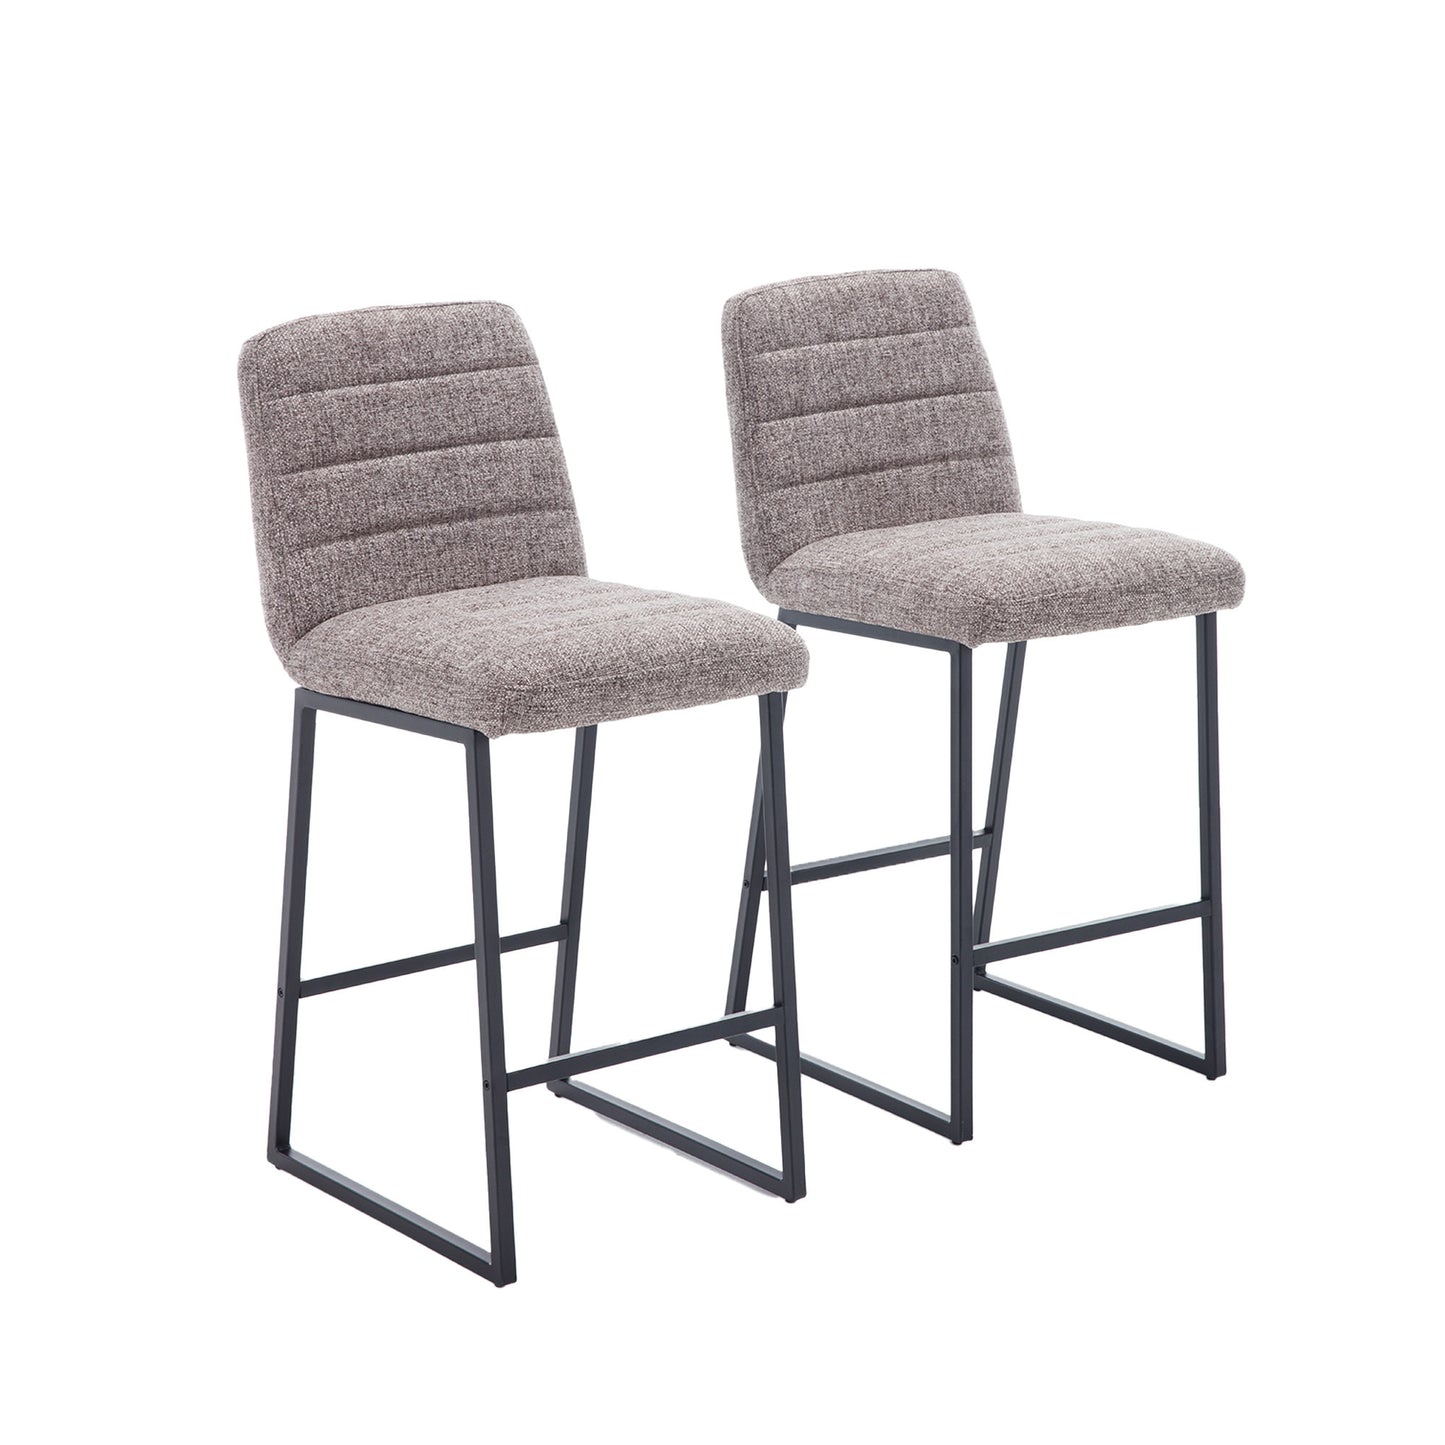 Low Bar Stools Set of 2 Bar Chairs for Living Room Party Room Kitchen,Upholstered Linen Fabric Kitchen Breakfast Bar Stools with Footrest,Coffee